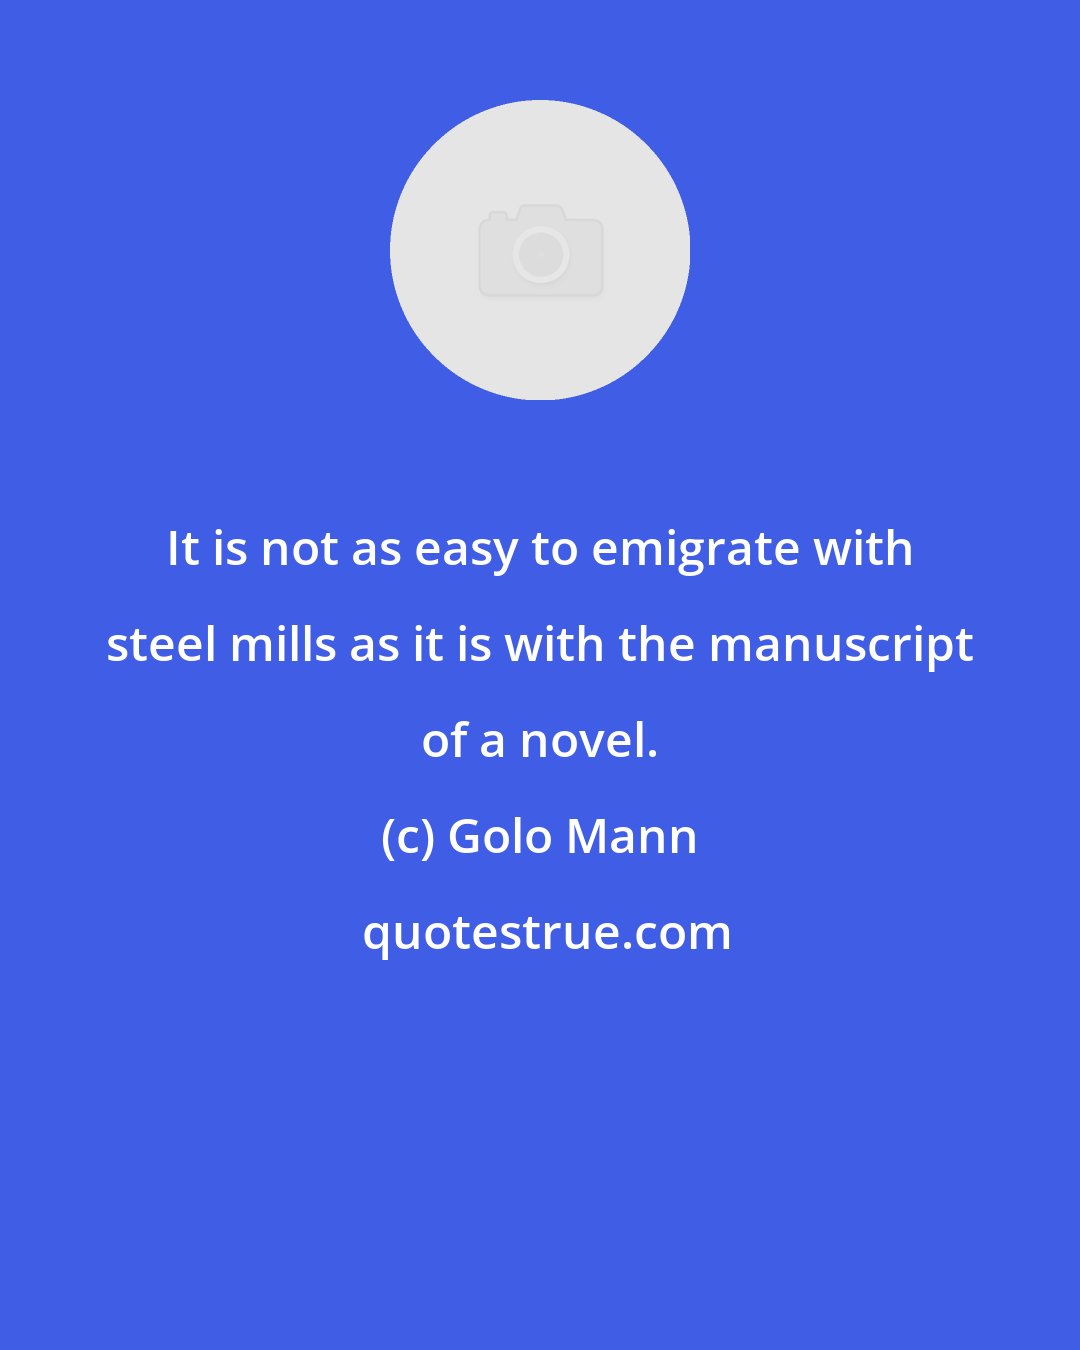 Golo Mann: It is not as easy to emigrate with steel mills as it is with the manuscript of a novel.